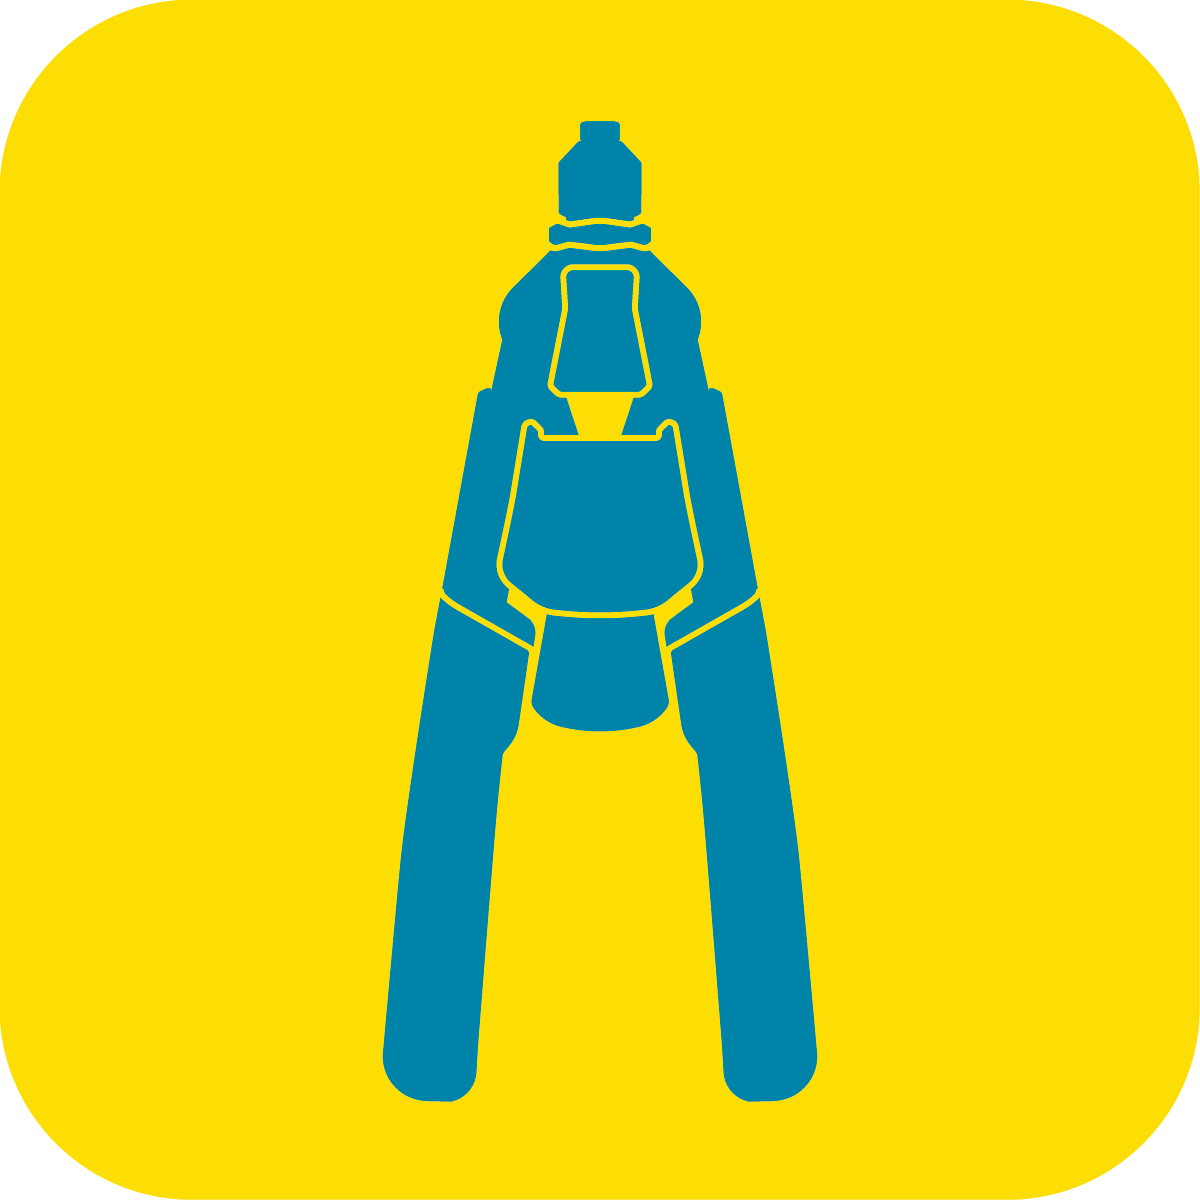 Rivet pliers and rivets icon